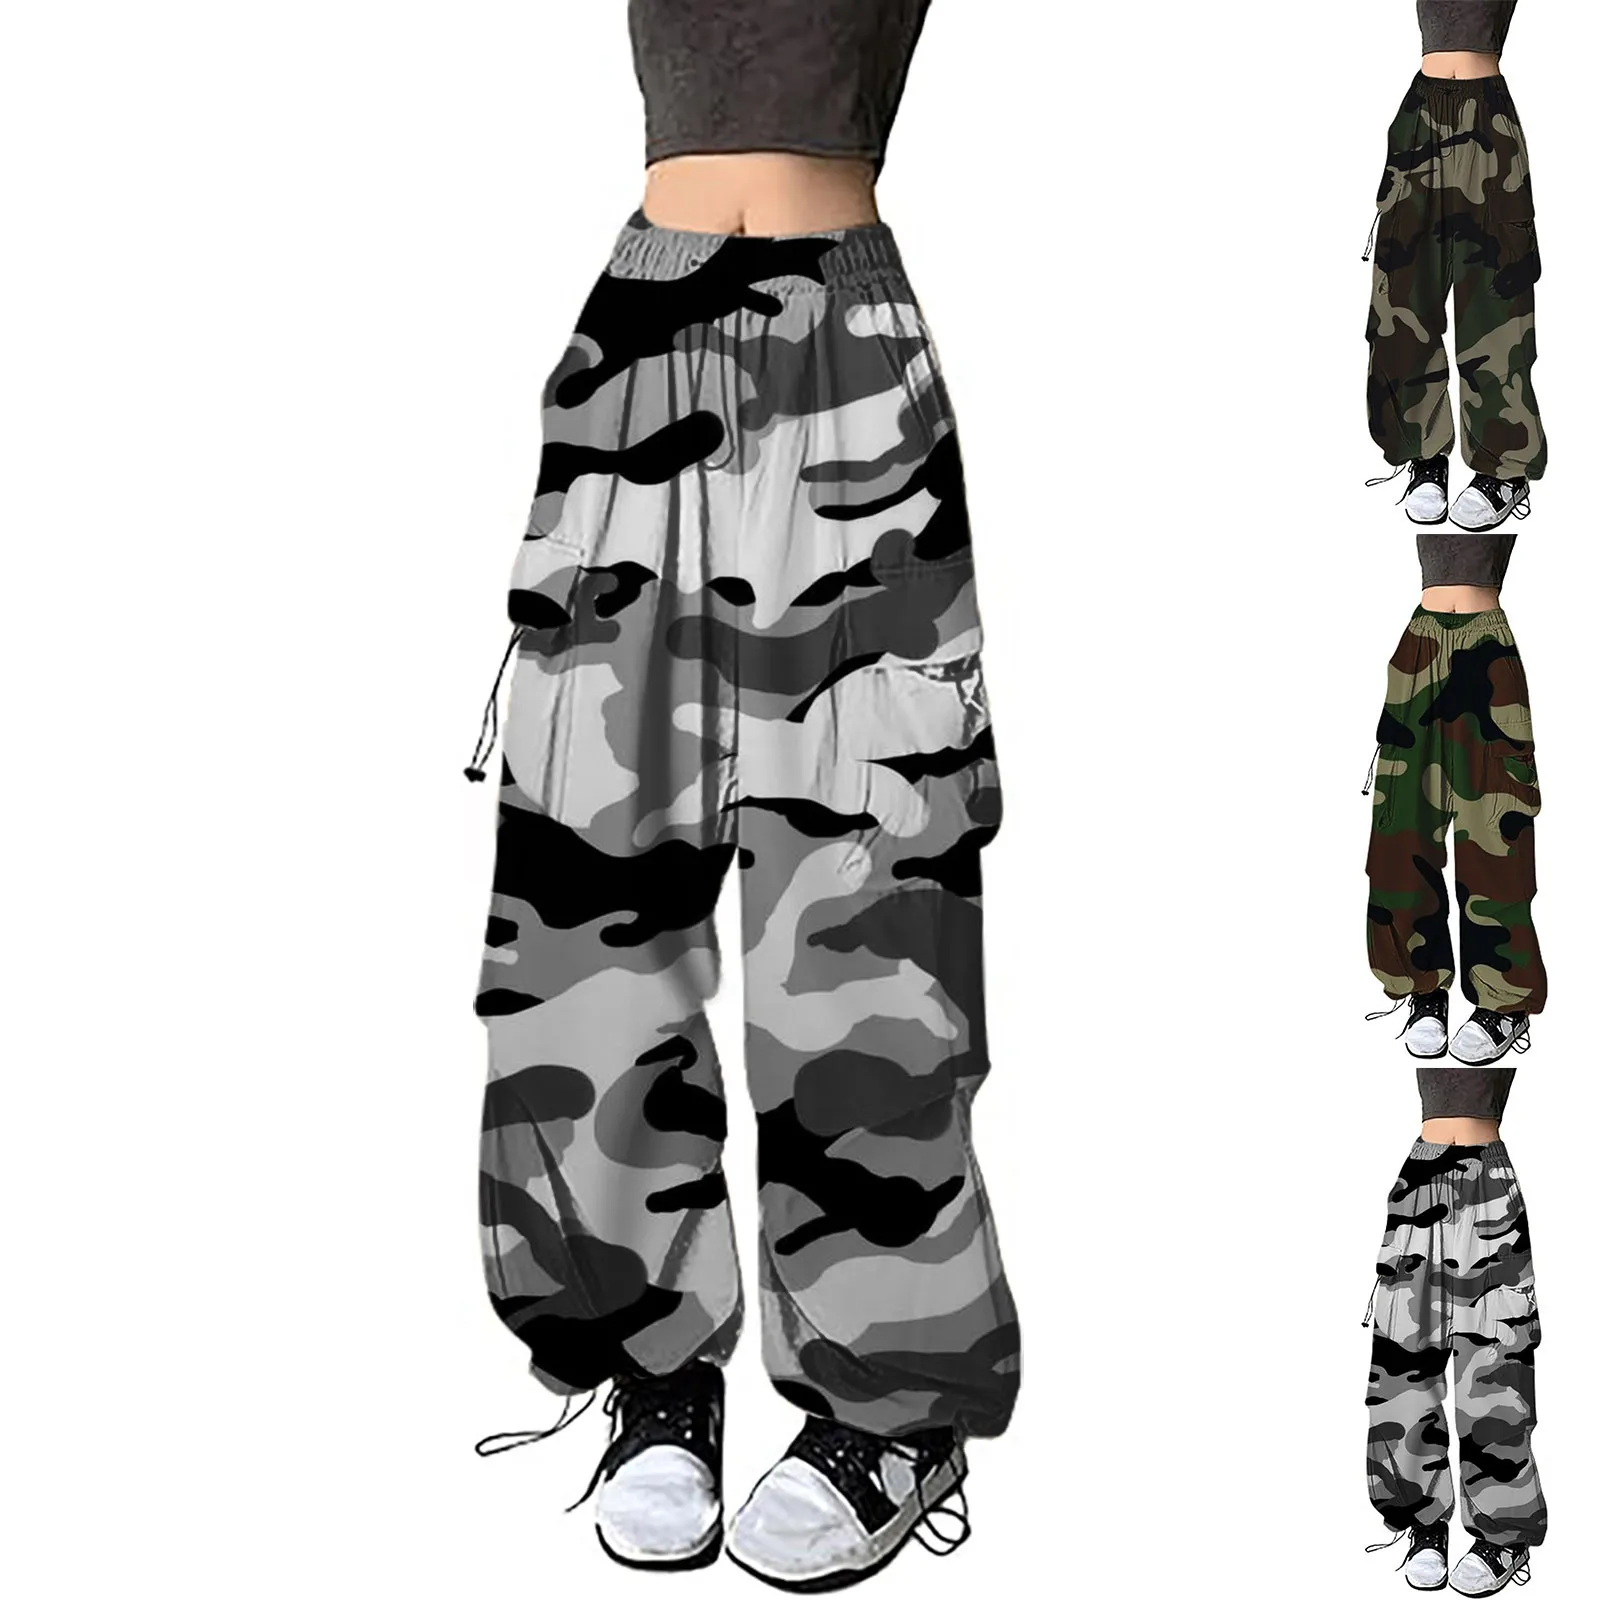 Stretchy Waist Womens Baggy Cargo Pants Y2K Streetwear Hip Hop Joggers Sweatpants Casual Loose Camouflage Wide Leg Trousers womens shorts striped loose maternity stretchy high waist shorts pants pregnancy pocket loose hot pants summer beach shorts